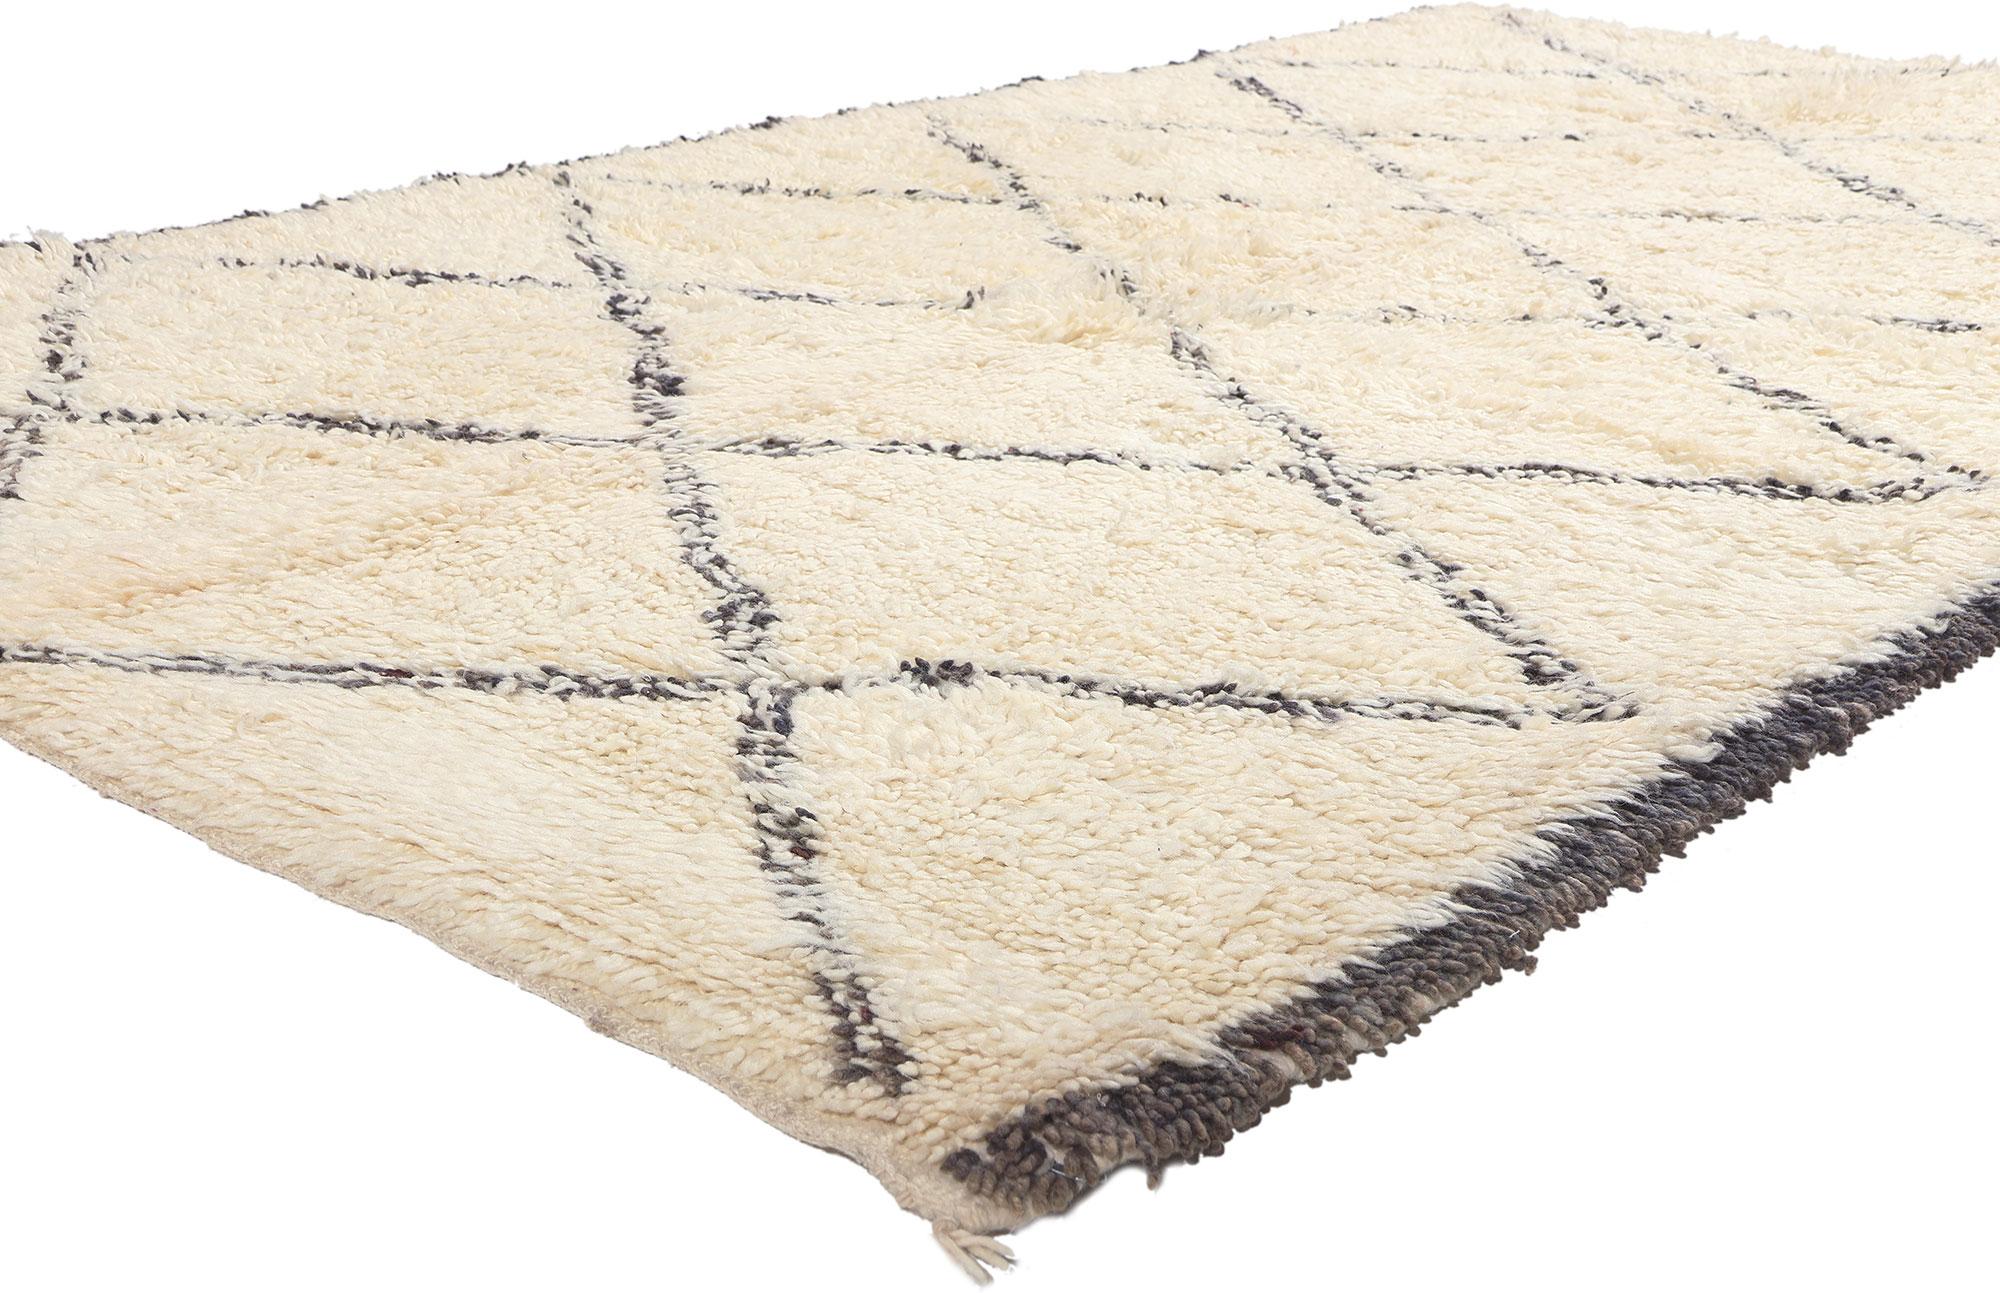 20655 Vintage Moroccan Beni Ourain Rug, 05'07 x 09'09. Originating from the Beni Ourain tribe, an integral part of the broader Berber ethnic group in Morocco, these Moroccan rugs are meticulously crafted using natural, undyed sheep's wool,